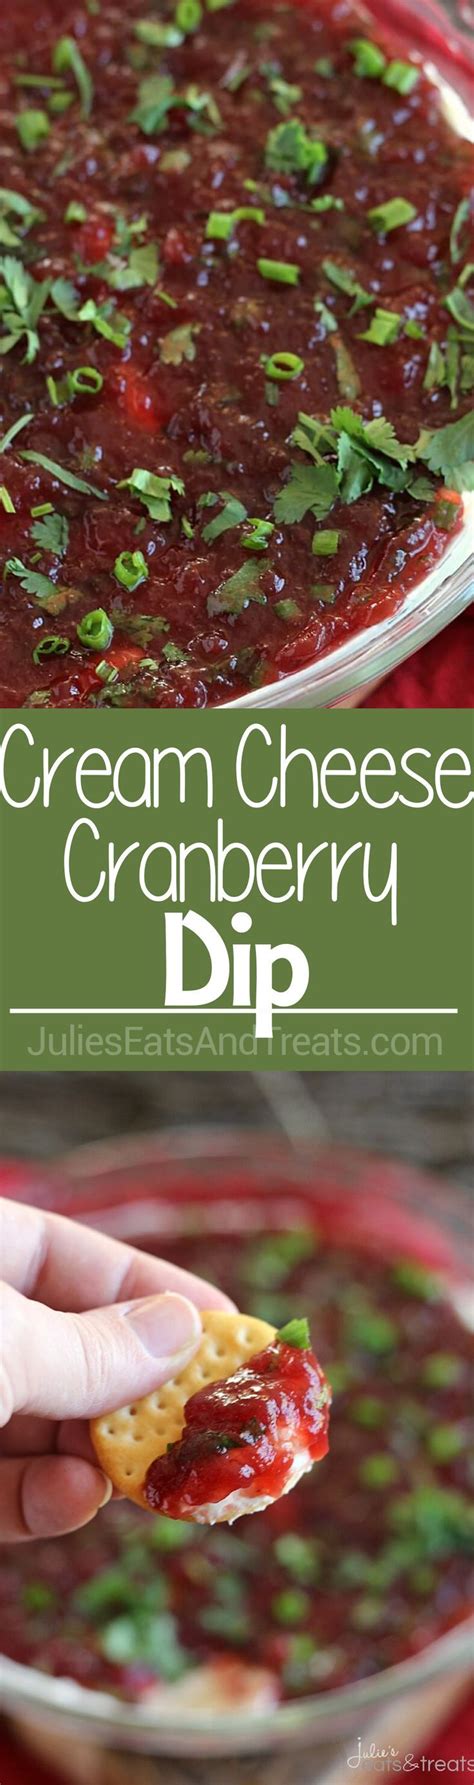 Cream Cheese Cranberry Dip ~ Easy Delicious Dip Layered With Cream